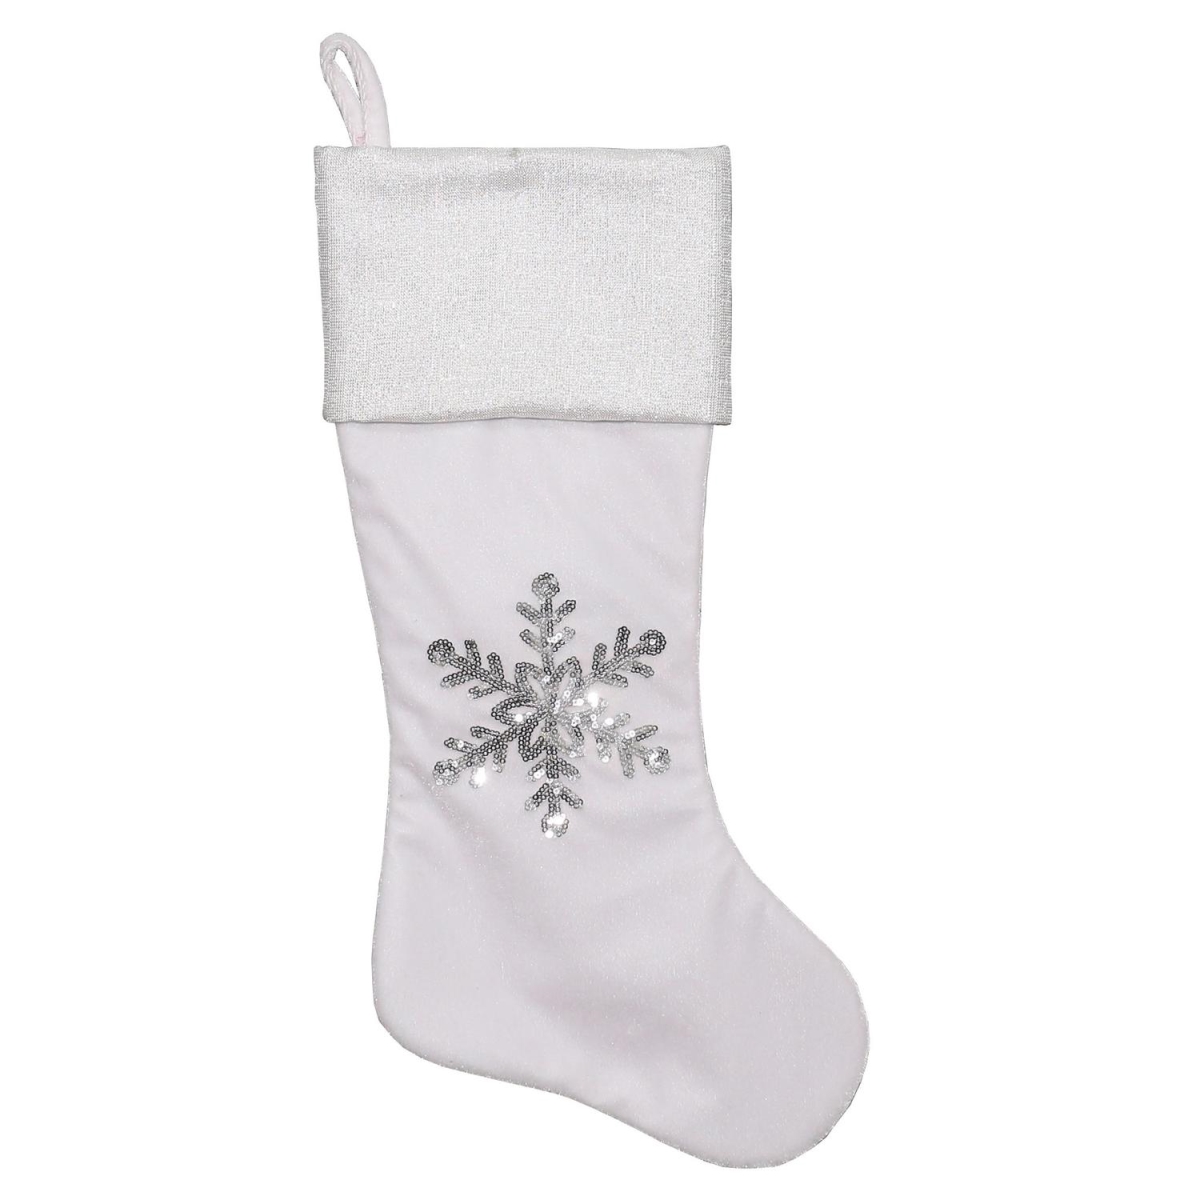 32635901 20 In. White Velvet Christmas Stocking With Silver Metallic Cuff & Silver Sequined Snowflake Design